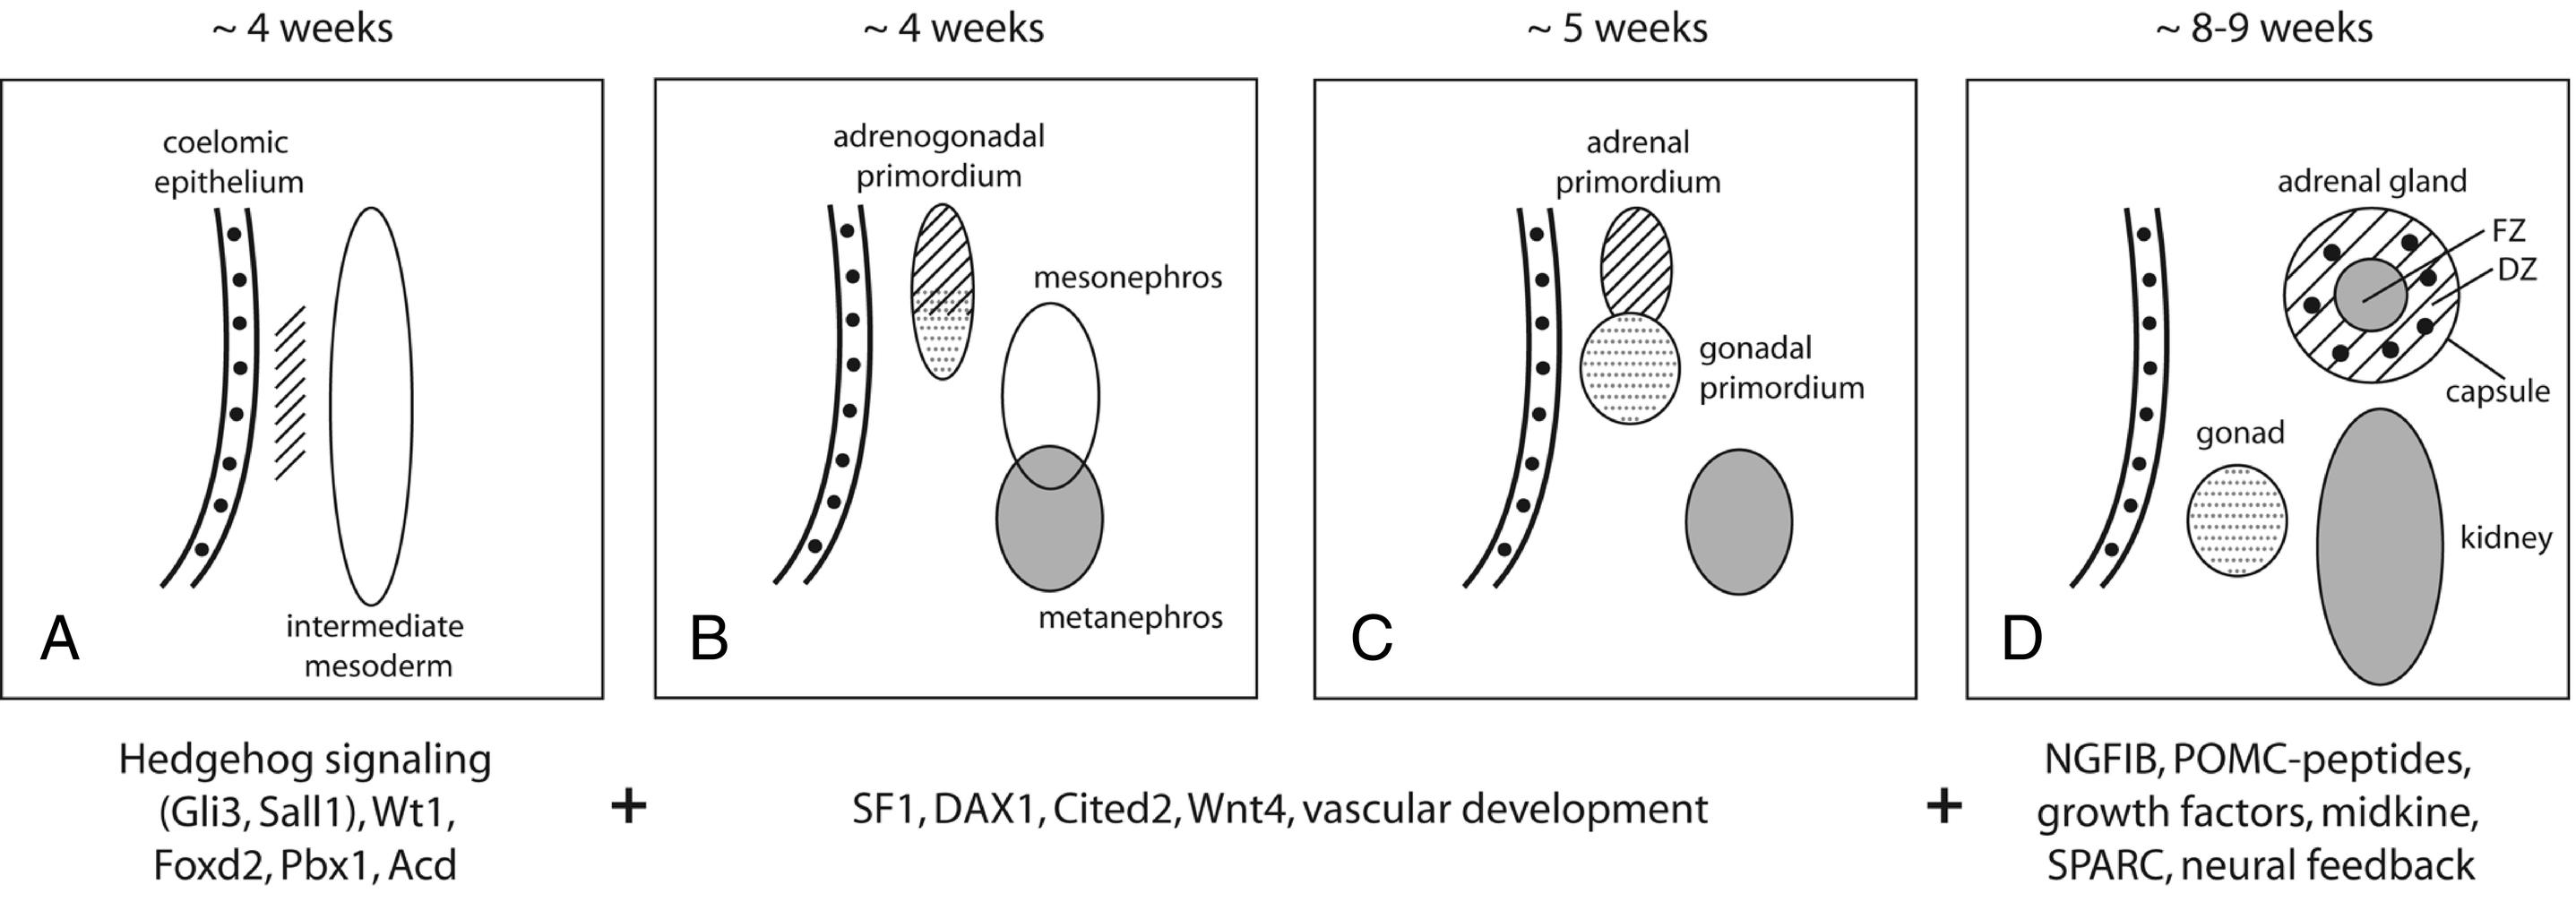 Fig. 14.1, Overview of human adrenal development. A–C, The adrenogonadal primordium develops at around 4 weeks, gestation, after which the adrenal primordium becomes a distinct structure that then migrates retroperitoneally to the cranial pole of the mesonephros. D, By 8 to 9 weeks’ gestation, the adrenal gland is encapsulated, contains chromaffin cells (black) and has distinct fetal (FZ) and definitive zones (DZ). Some of the signaling molecules, transcription factors, and growth factors implicated in adrenal development are shown later, although the exact timing and interaction of many of these factors remains poorly understood at present.